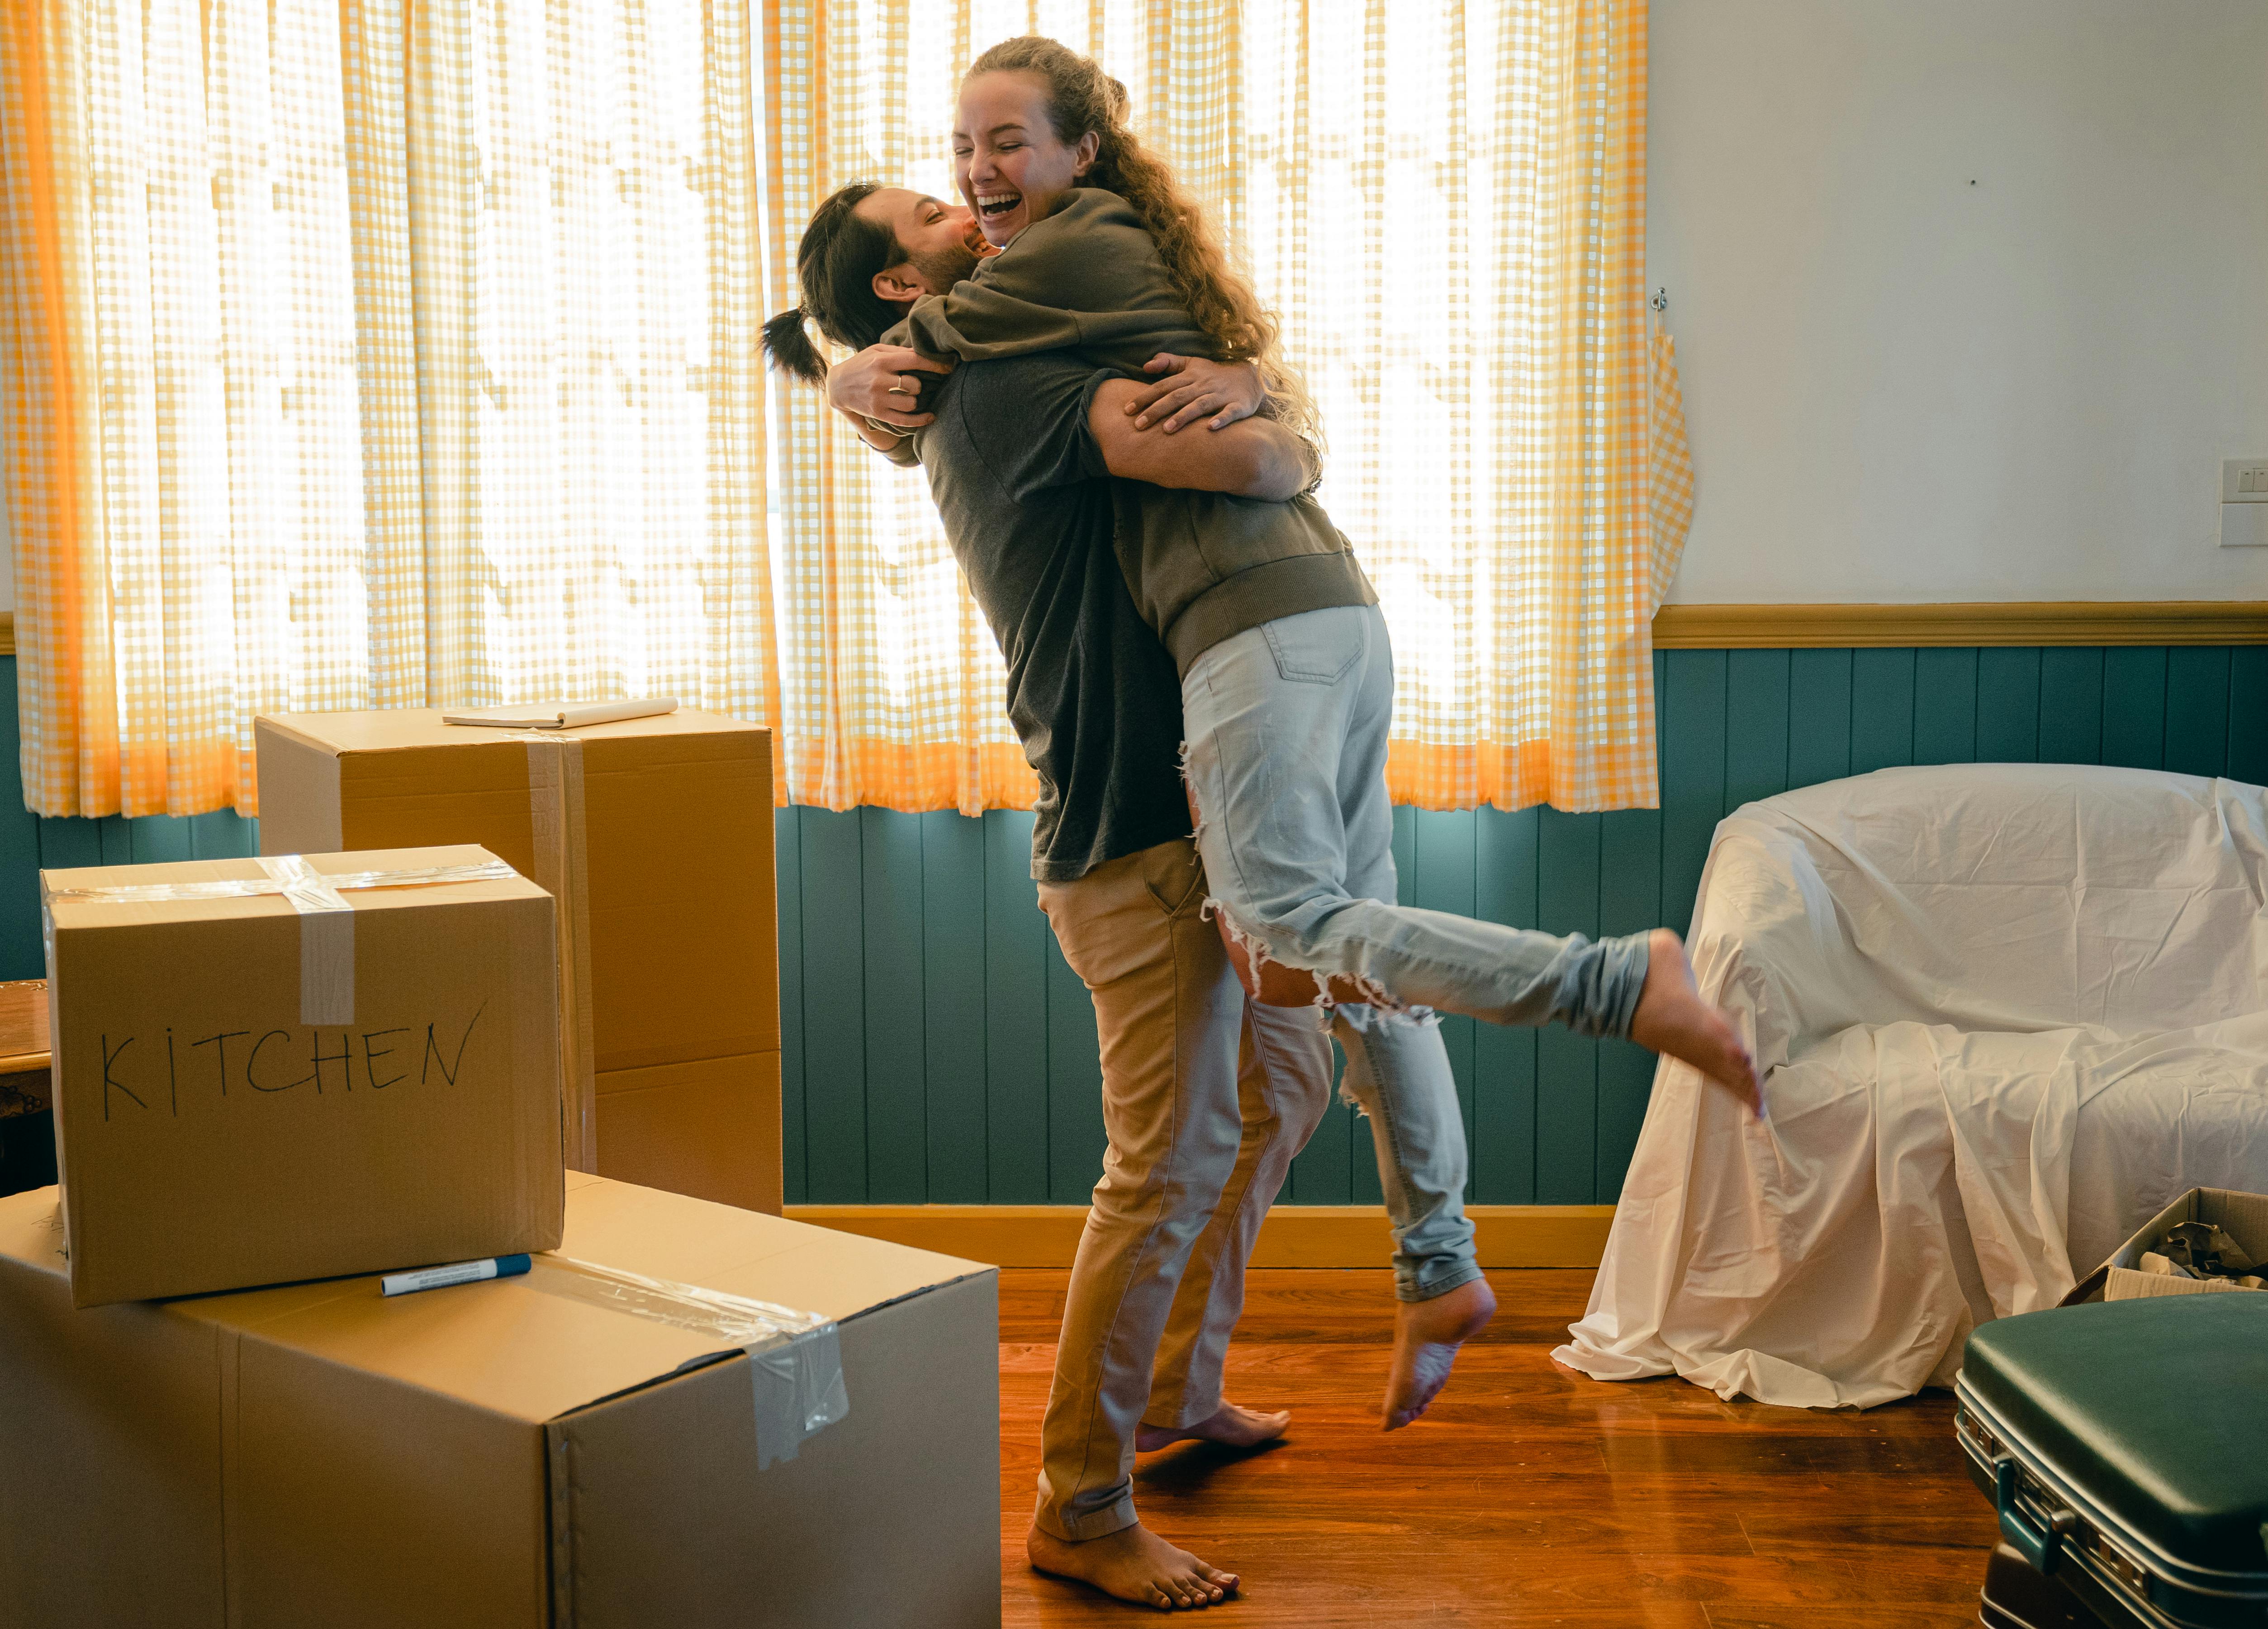 Cheerful couple hugs after moving | Source: Pexels